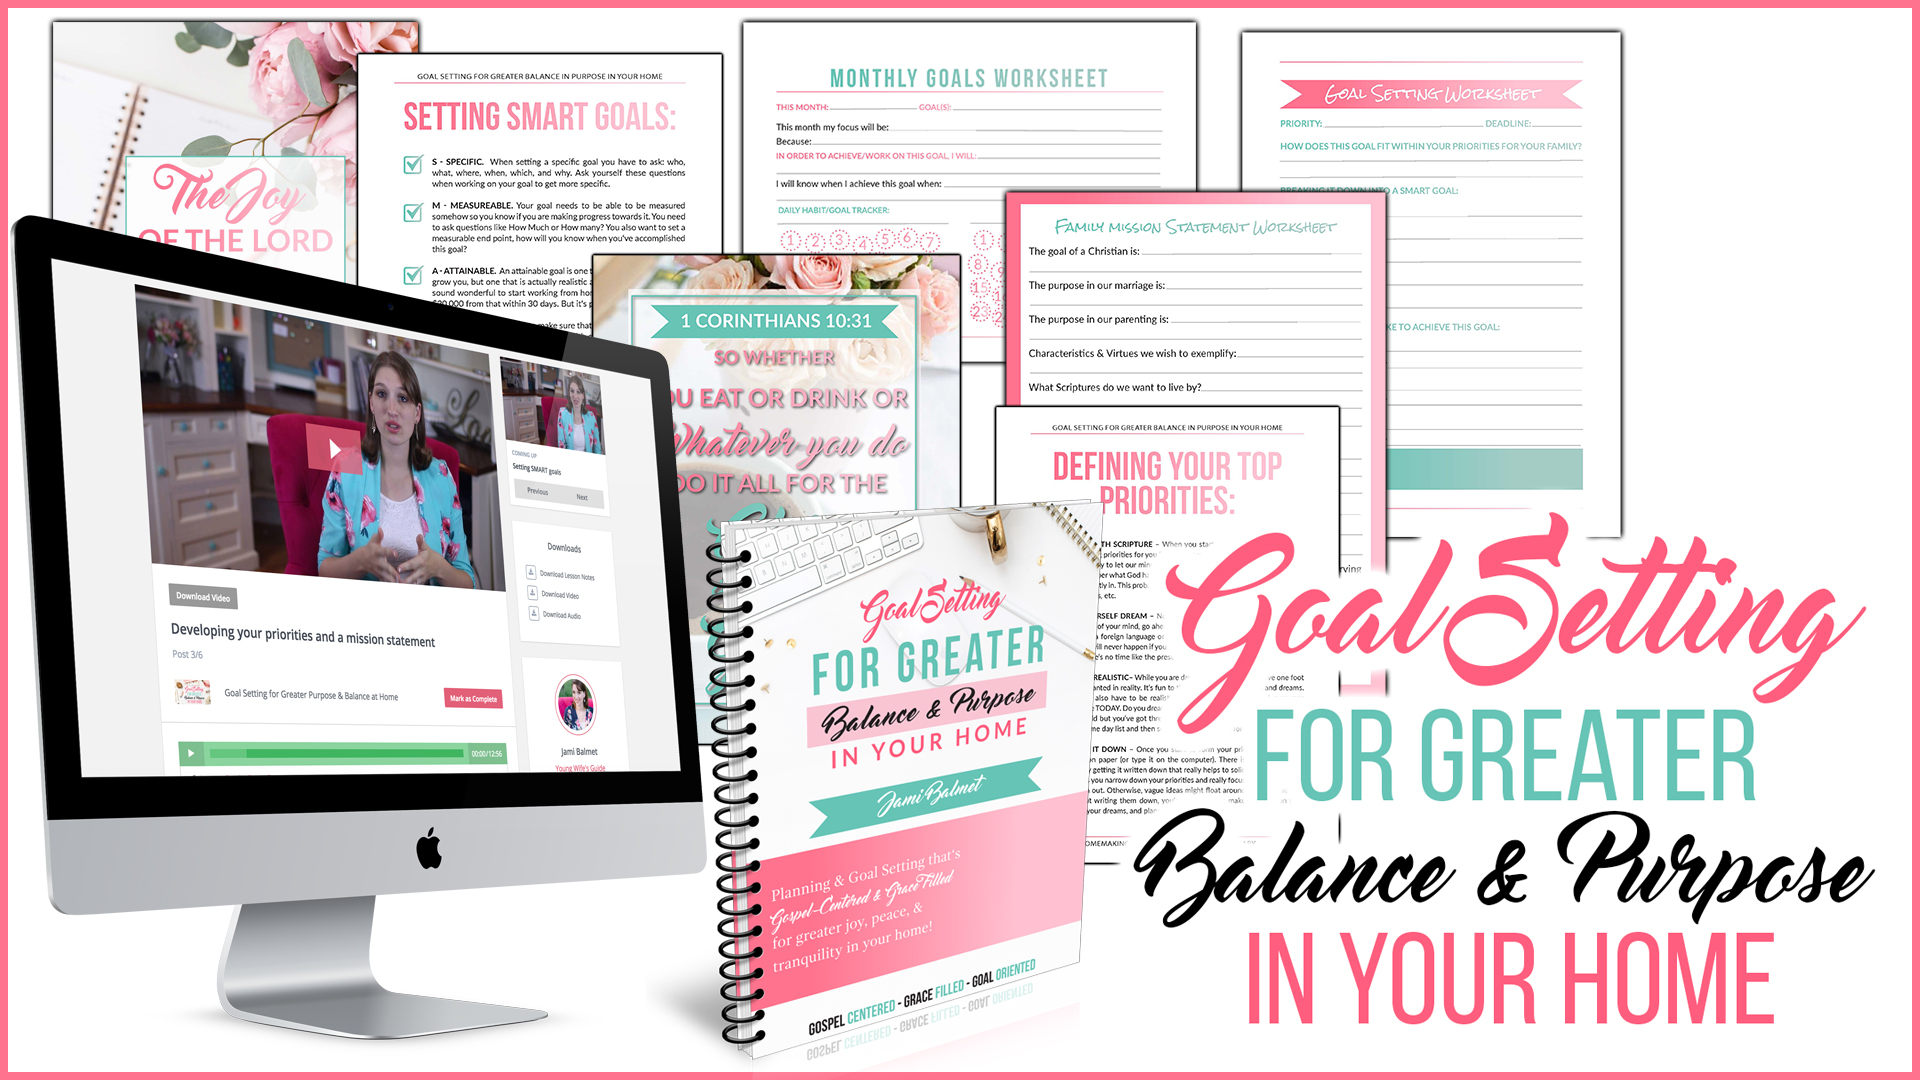 Goal setting for greater balance and purpose in your home